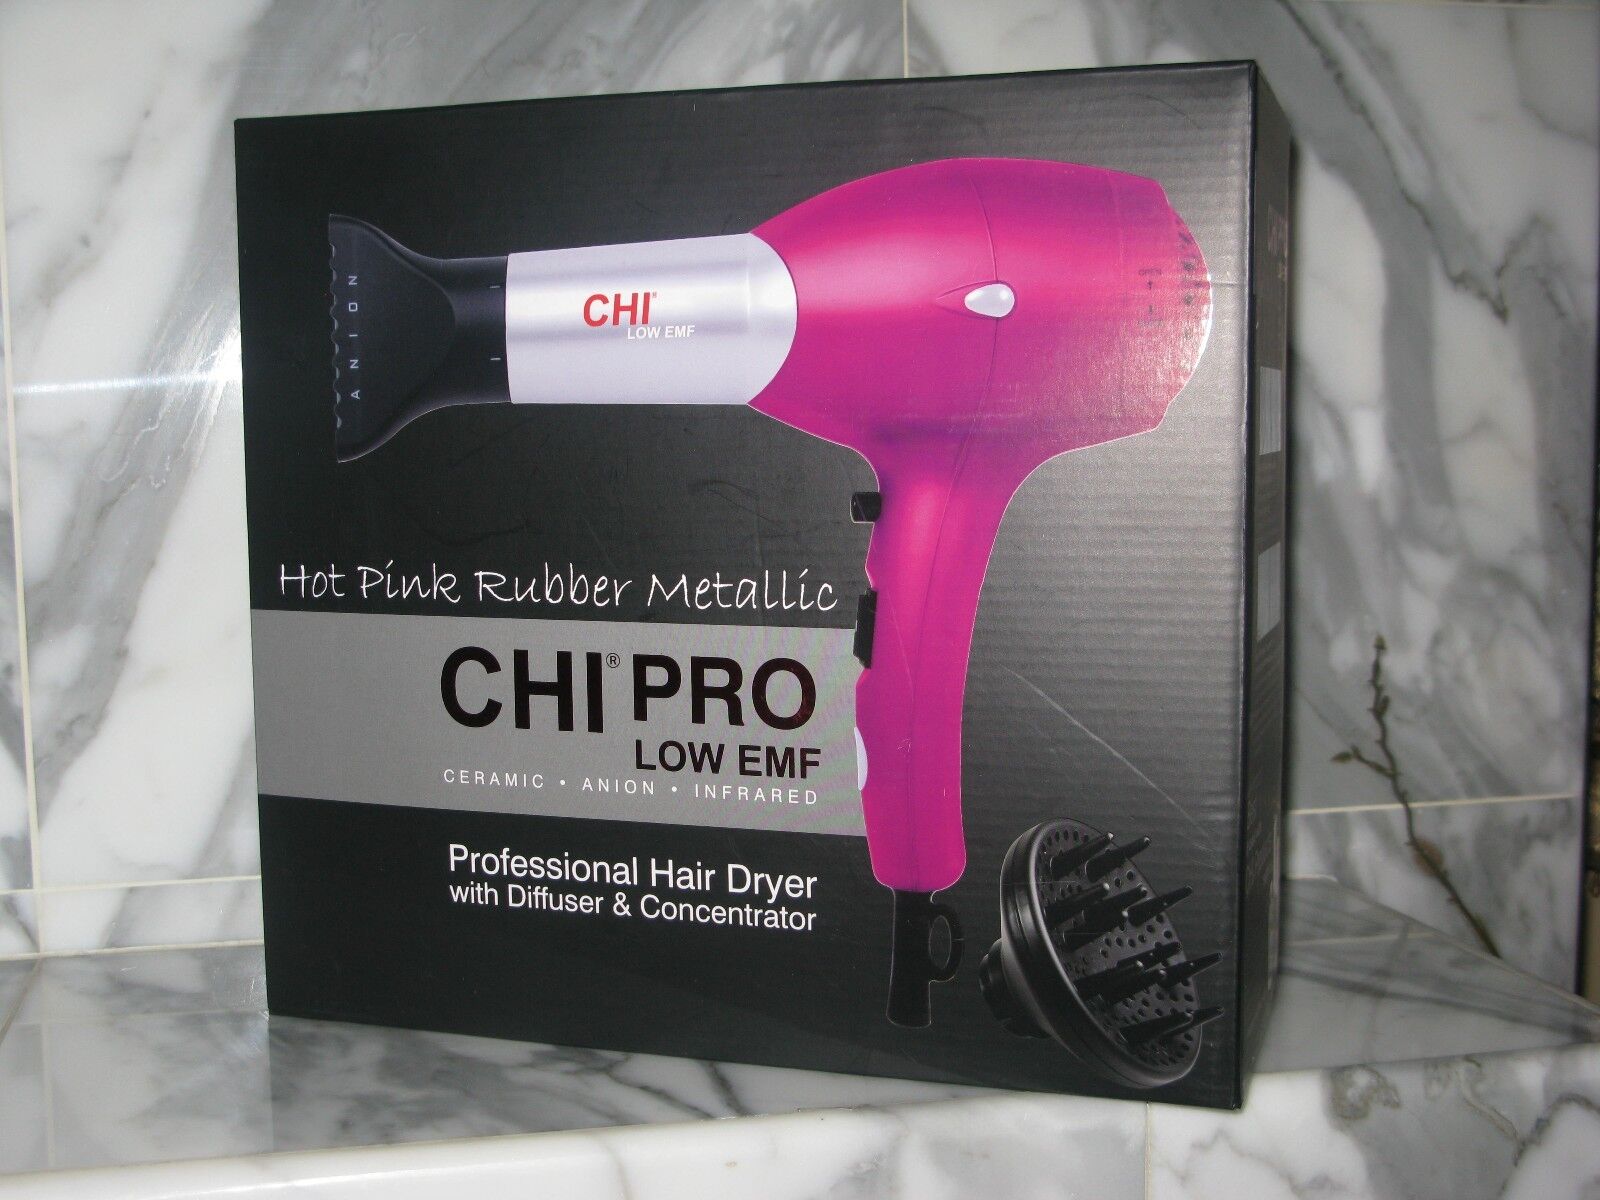 CHI Pink Rubber Metallic Pro Hair Dryer W Diffuser Concentrator